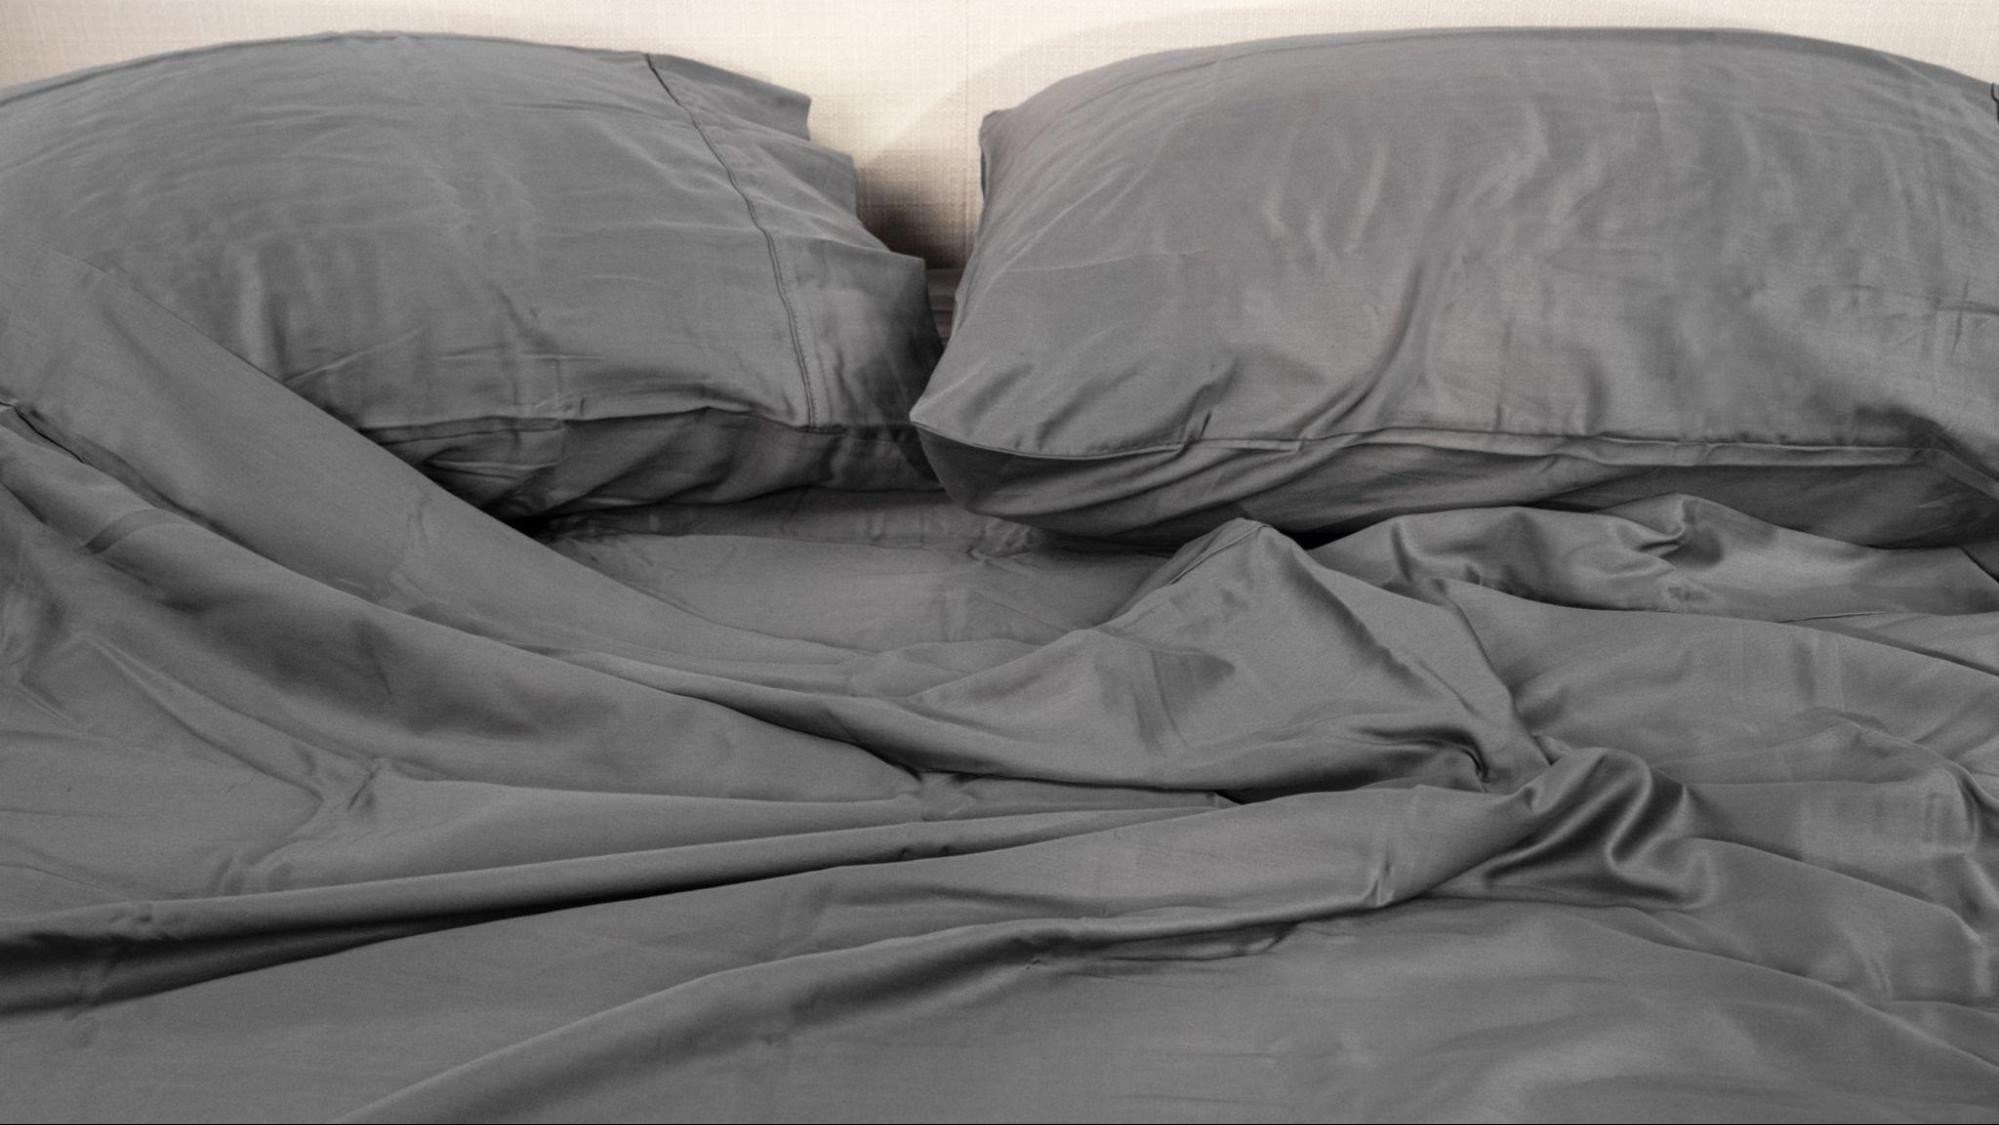 Miracle Sheets Silver-Infused to Resist Bacteria, Dirt and Germs